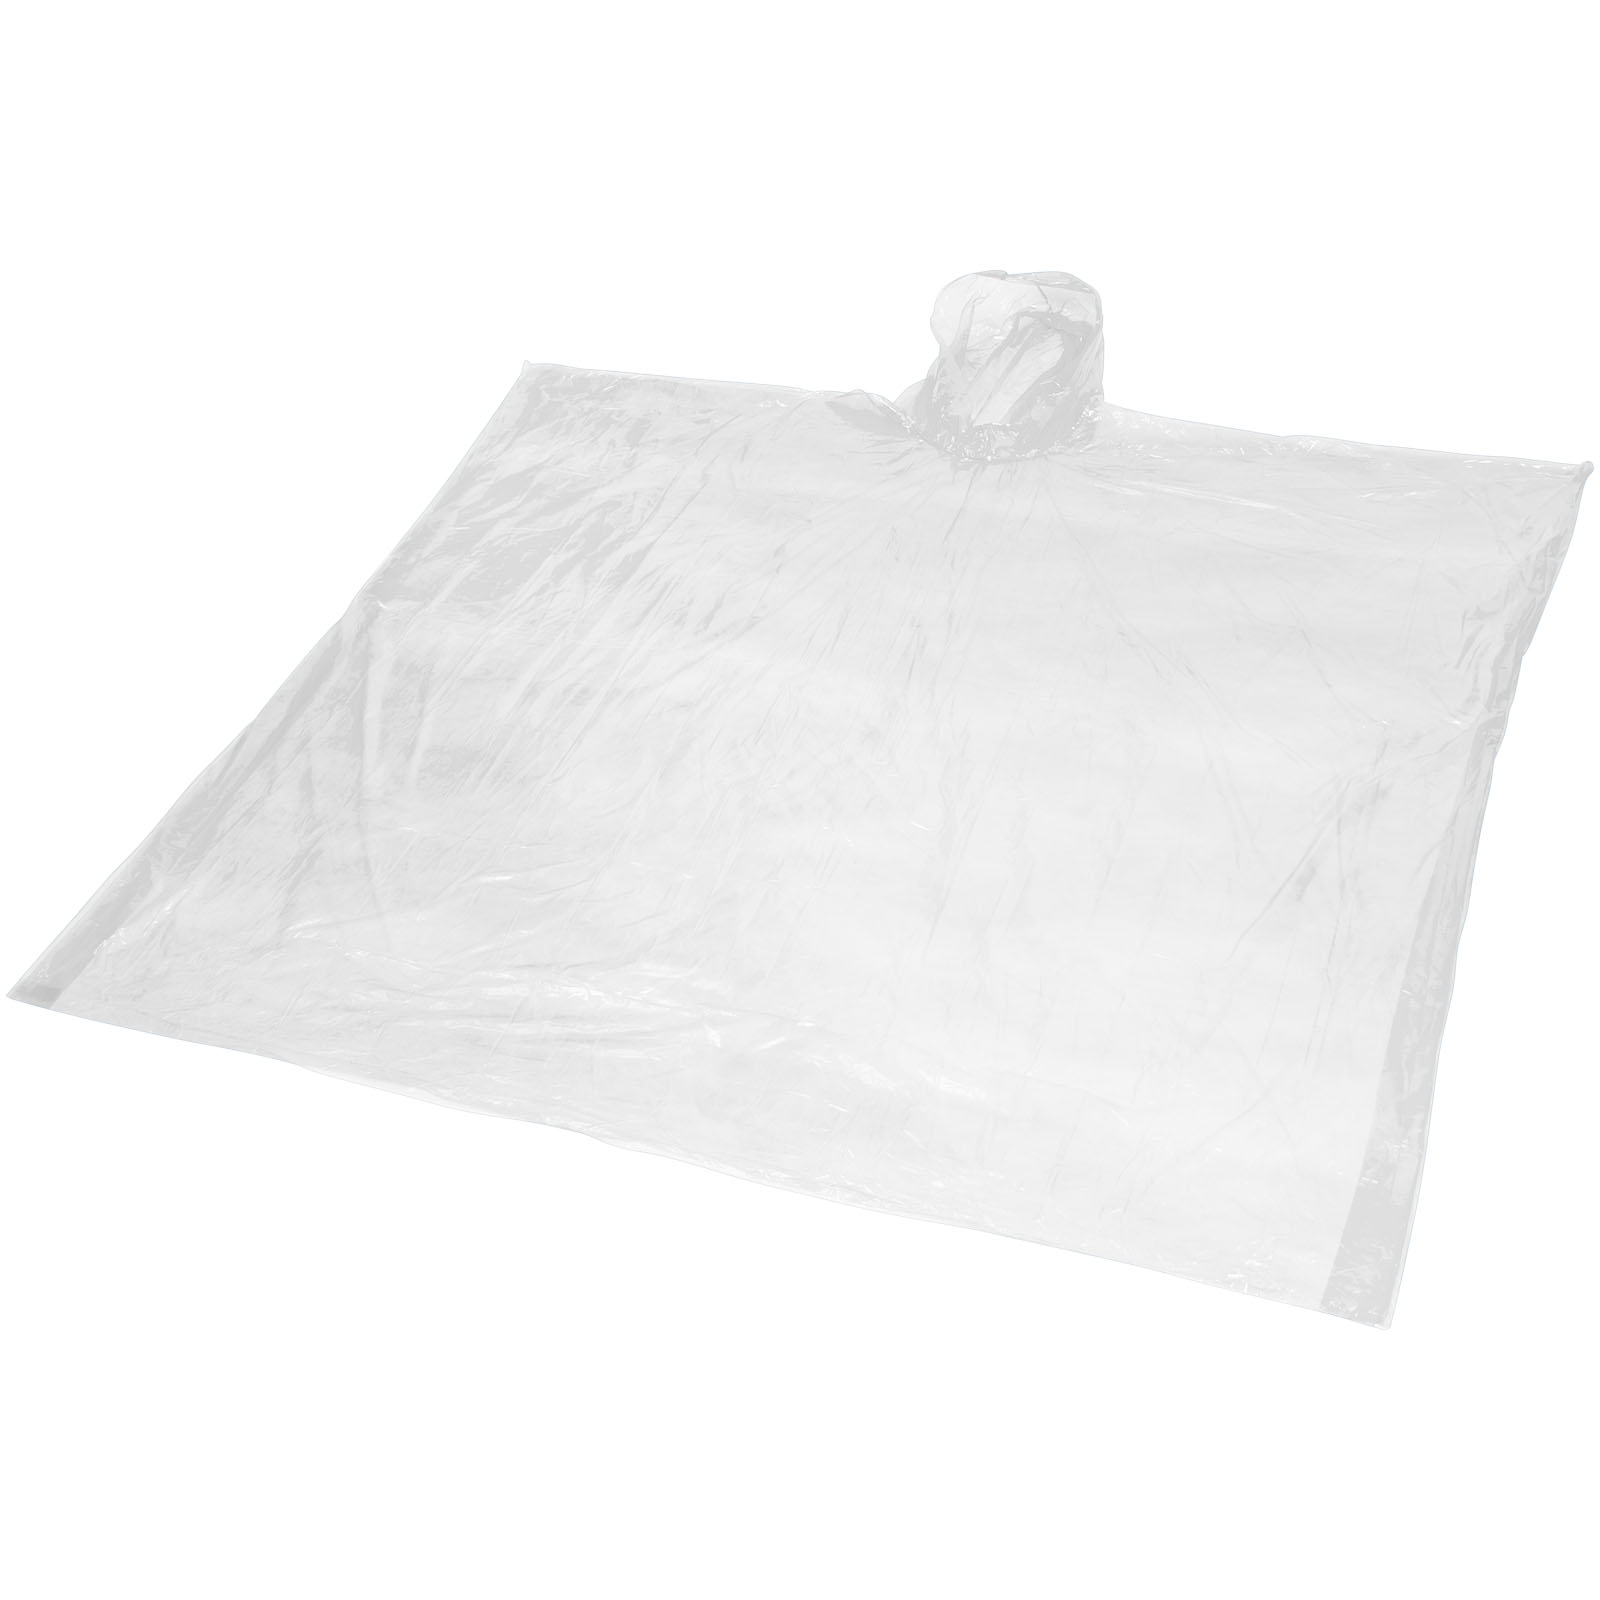 Advertising Rain Ponchos - Mayan recycled plastic disposable rain poncho with storage pouch - 0